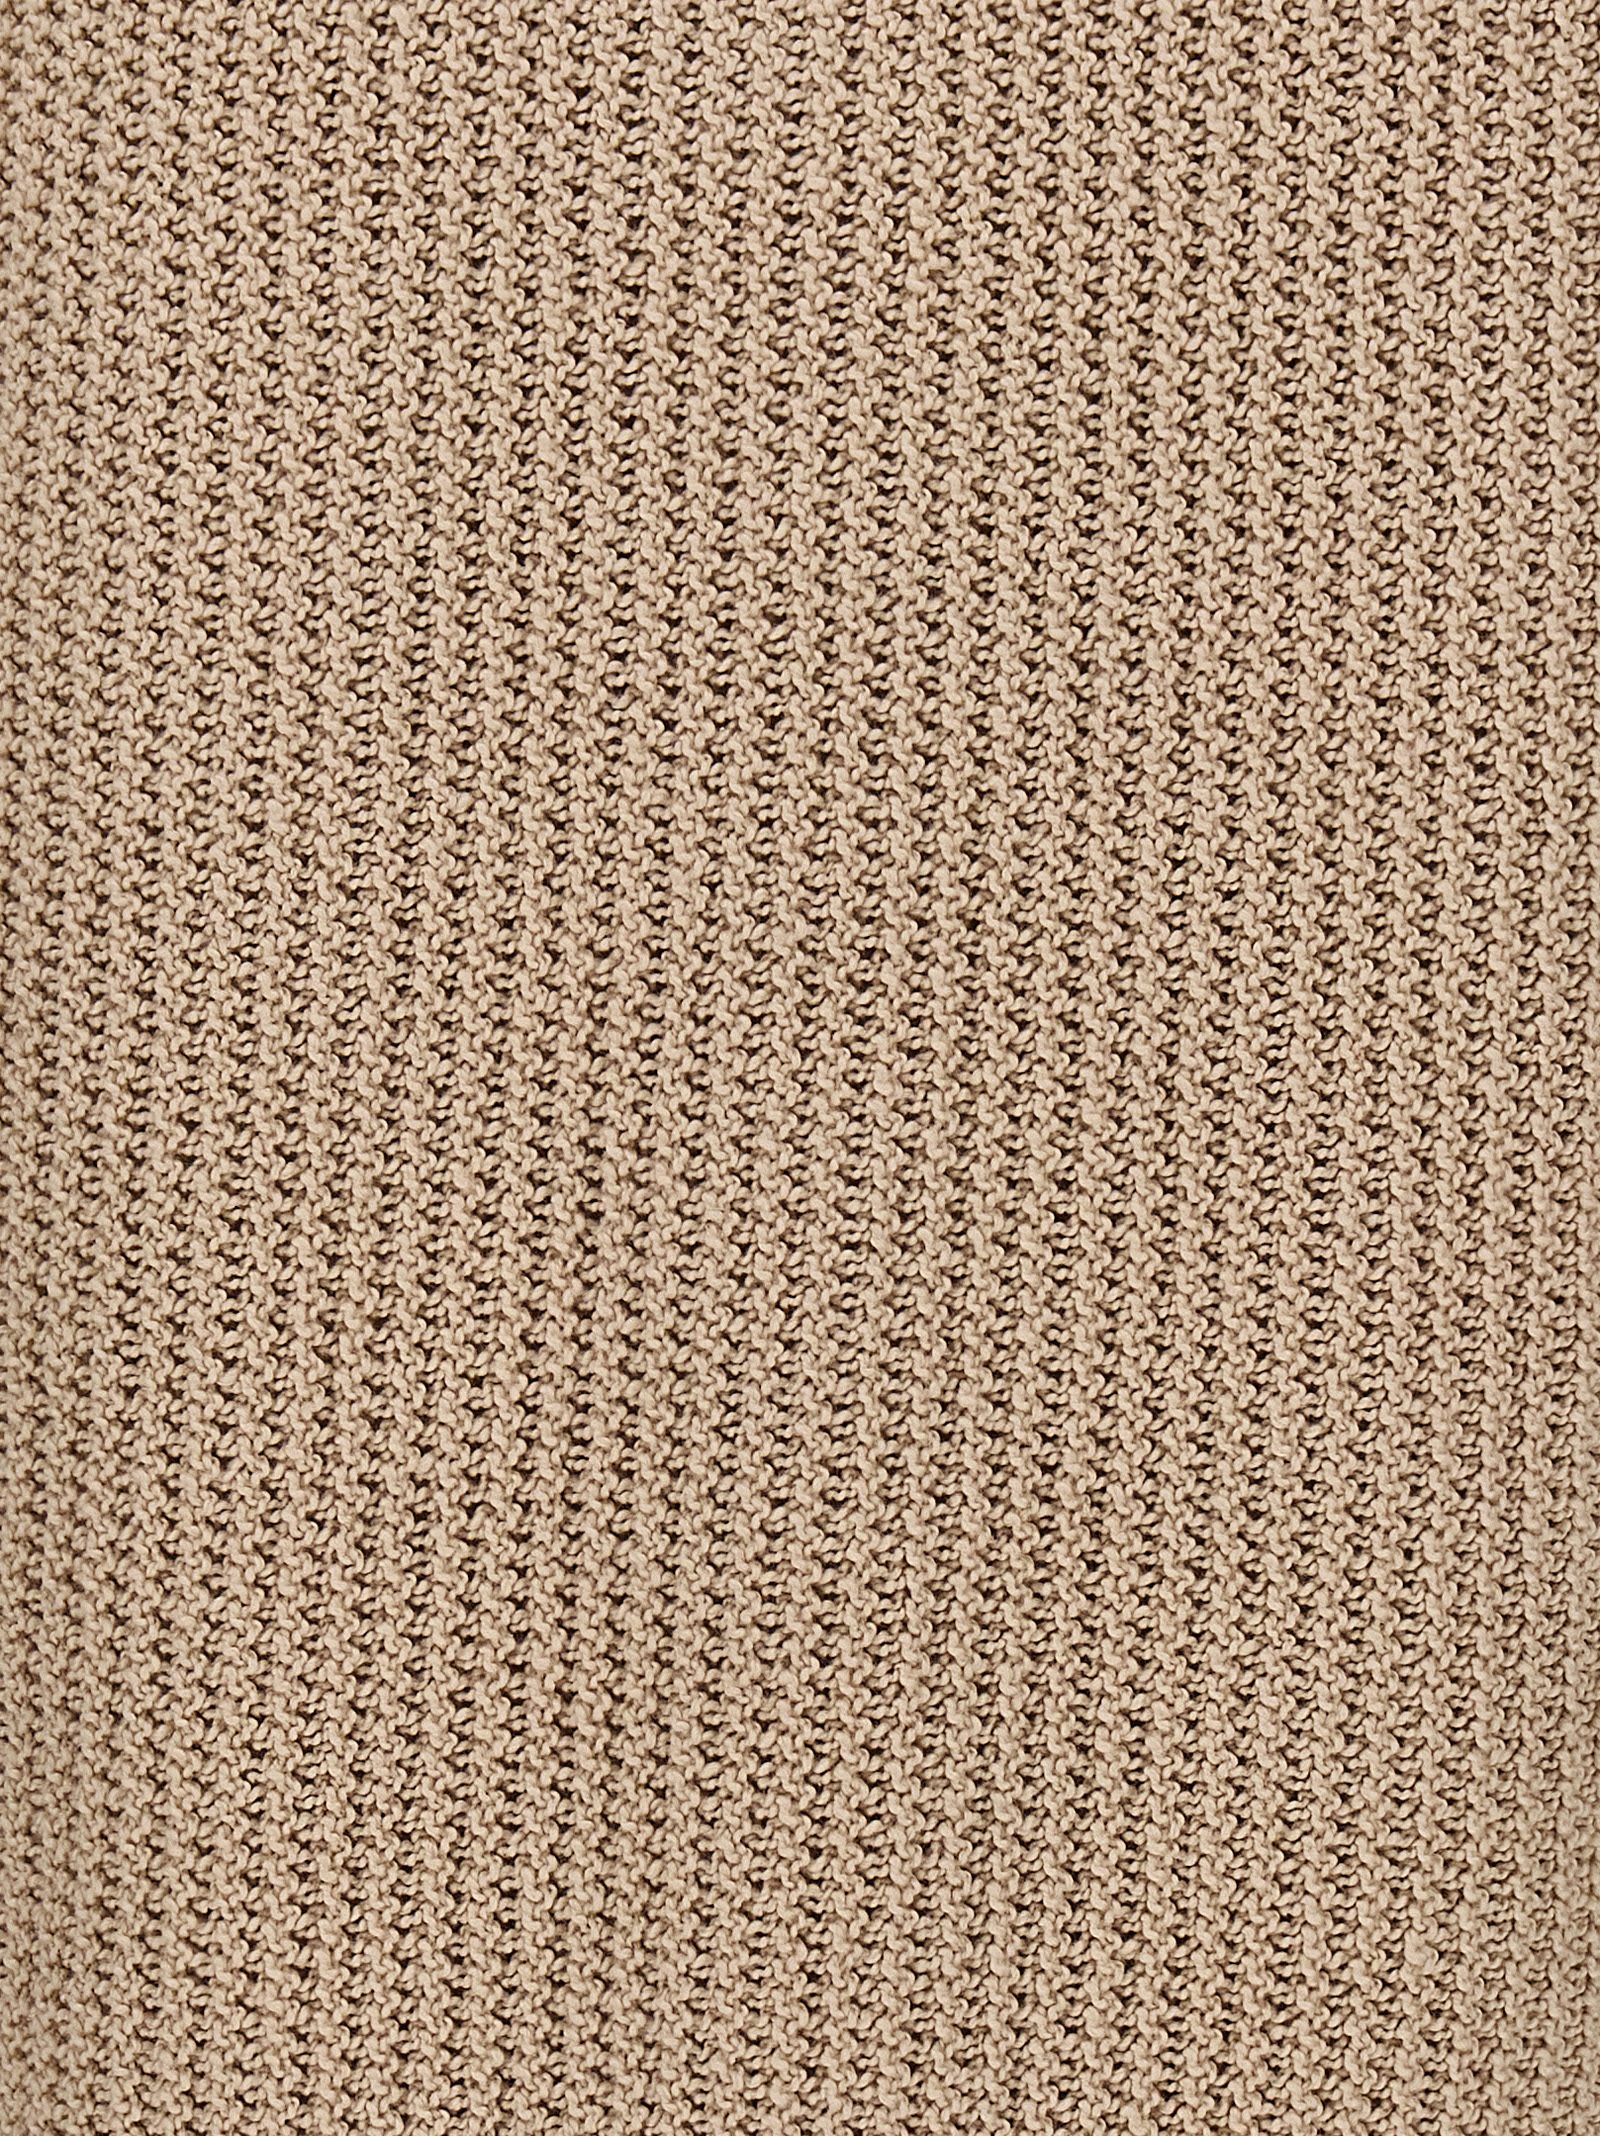 Shop Brioni Knitted Polo Shirt In Beige